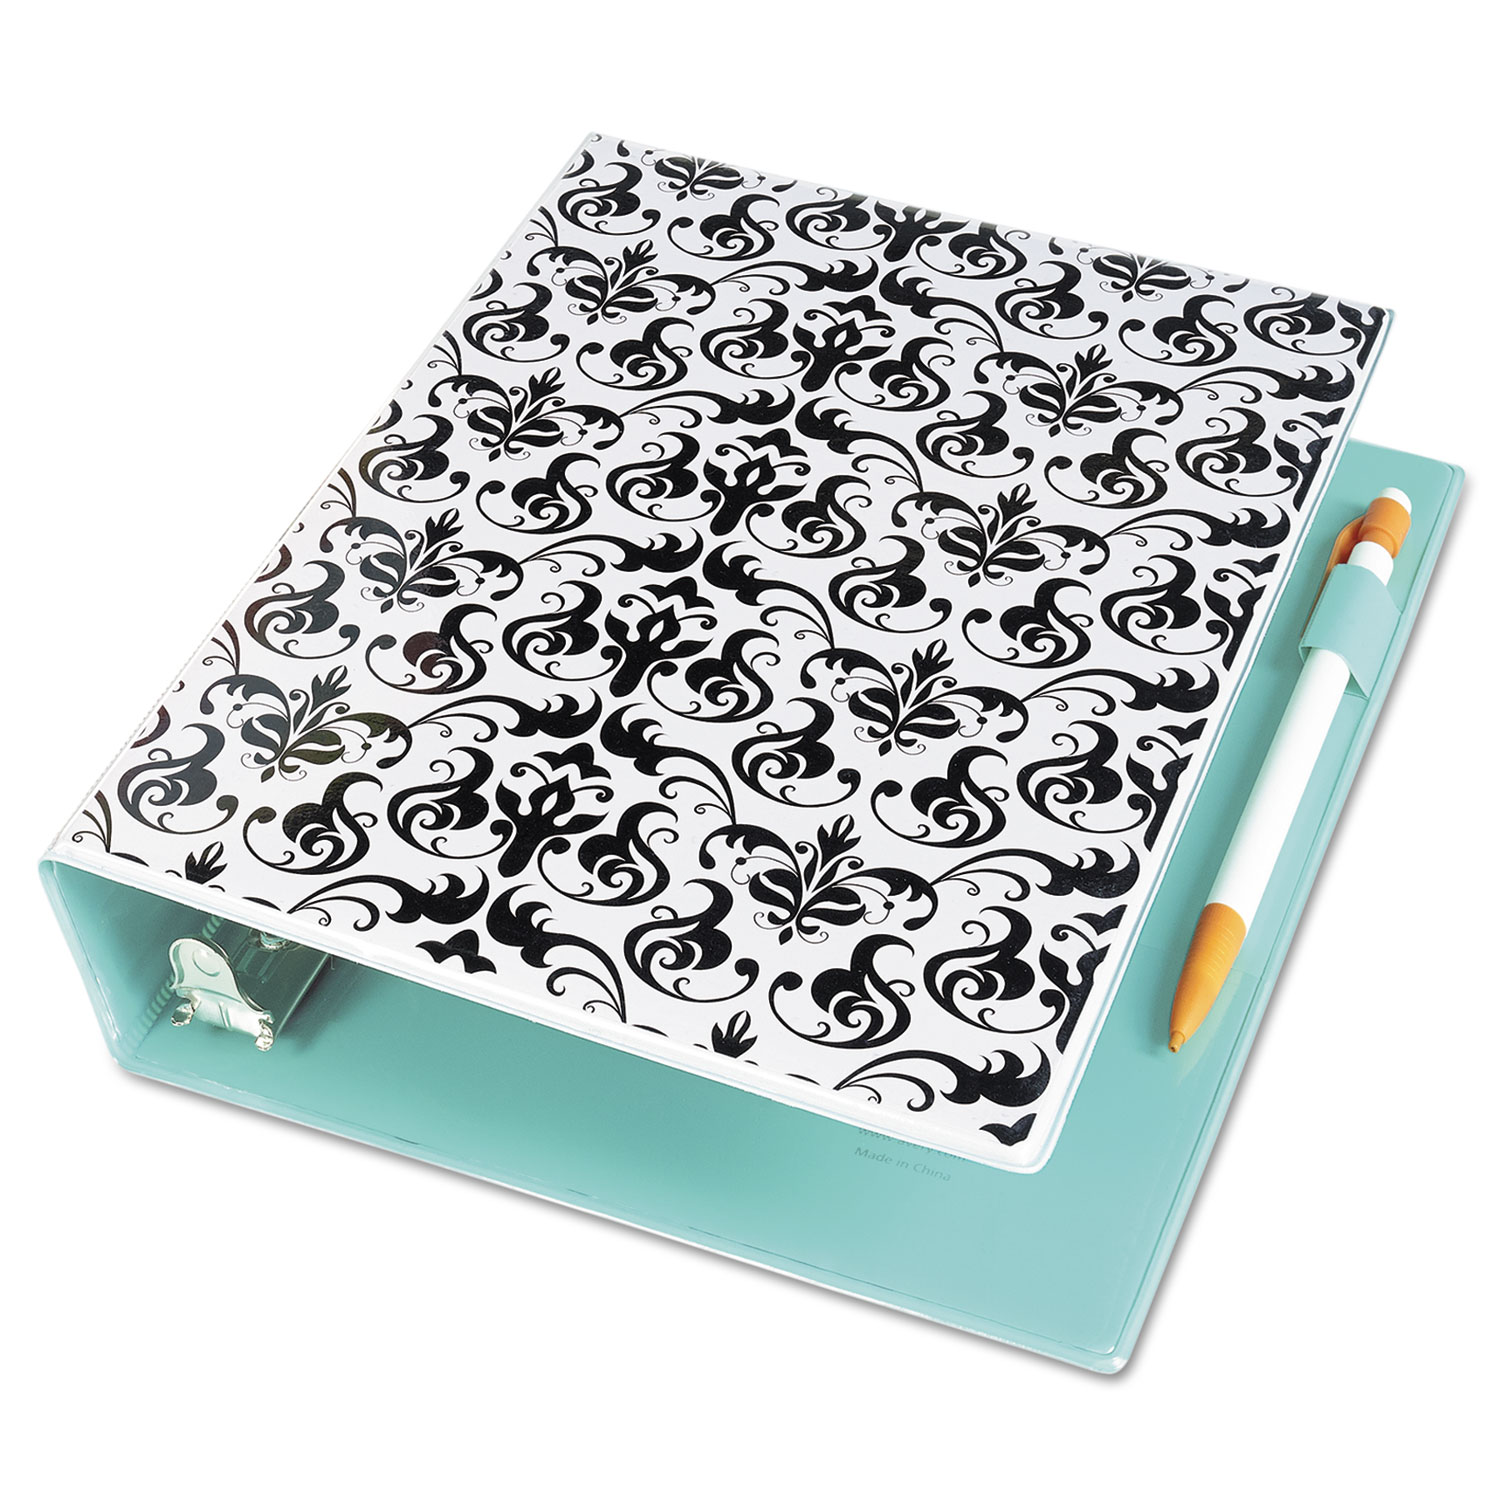 - New Avery Mini Durable 3 Ring Binder 18445 1 Round Rings 1 Chandelier Damask Binder Holds 5.5 x 8.5 Paper 